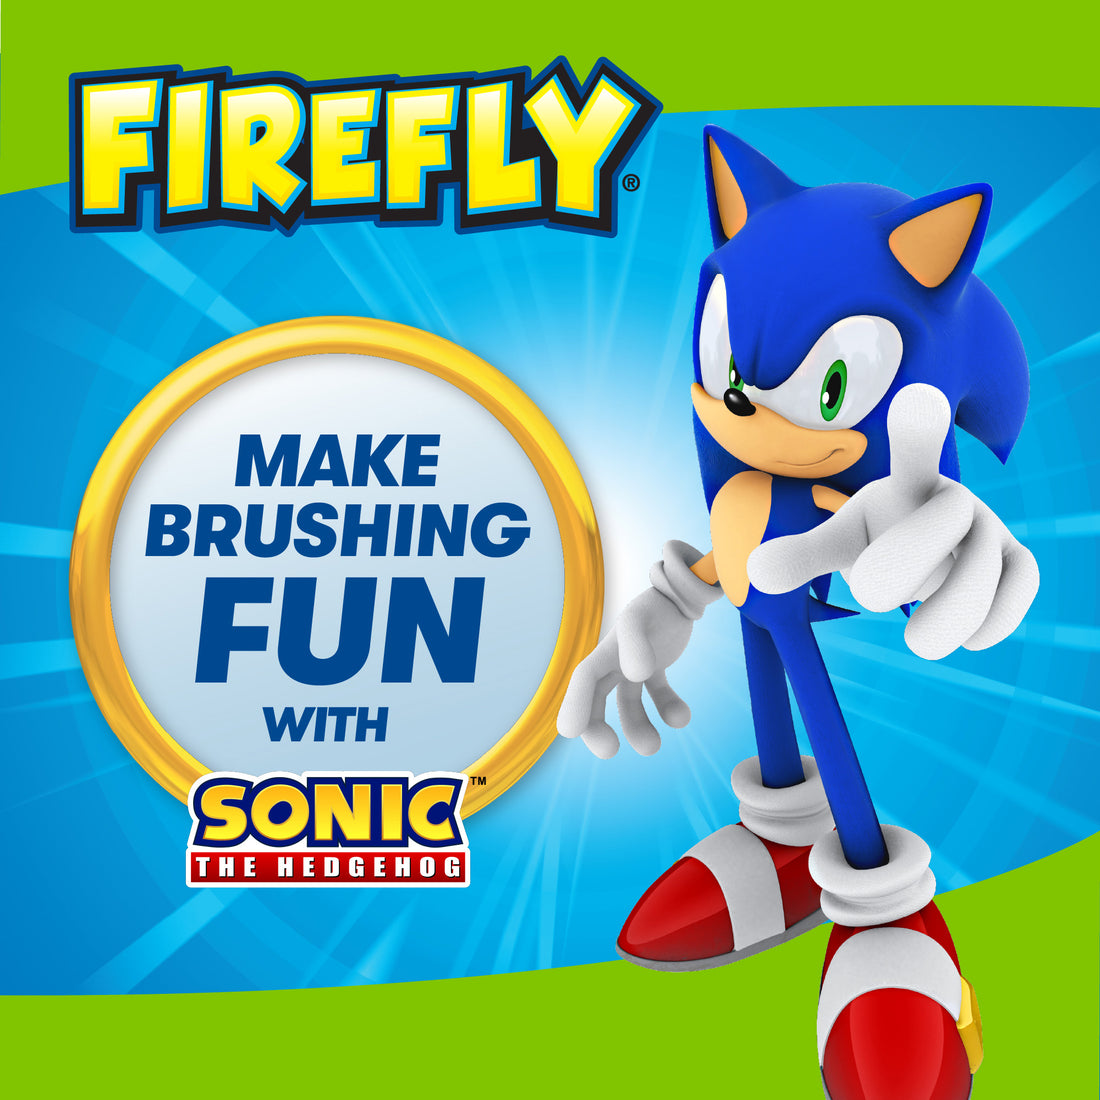 Firefly Kids Anti-Cavity Natural Fluoride Toothpaste, Sonic the Hedgehog, Bubble Gum Flavor